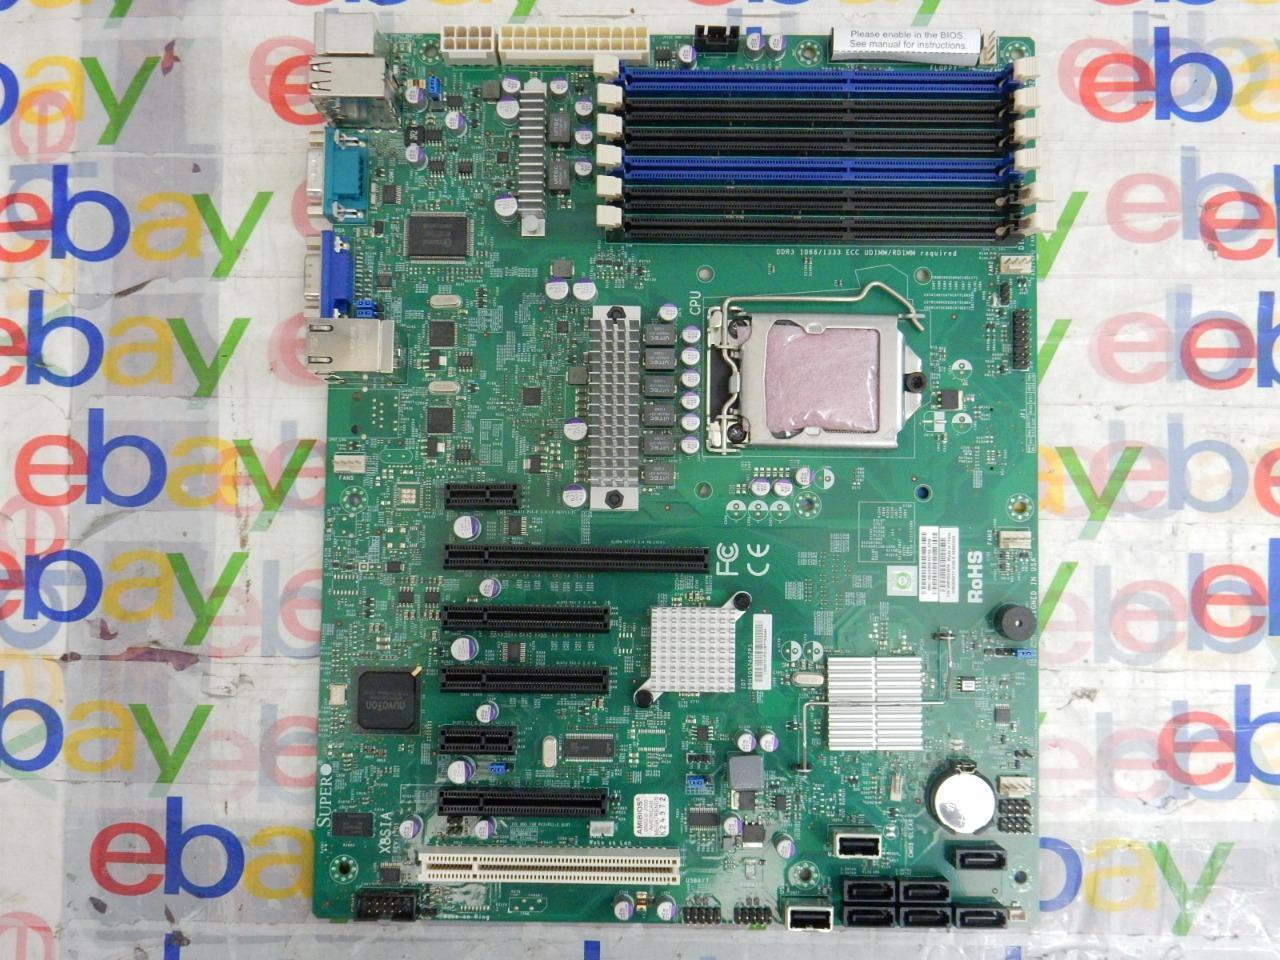 SuperMicro X8SIA DDR3 1156 Intel ATX Server Motherboard - TESTED